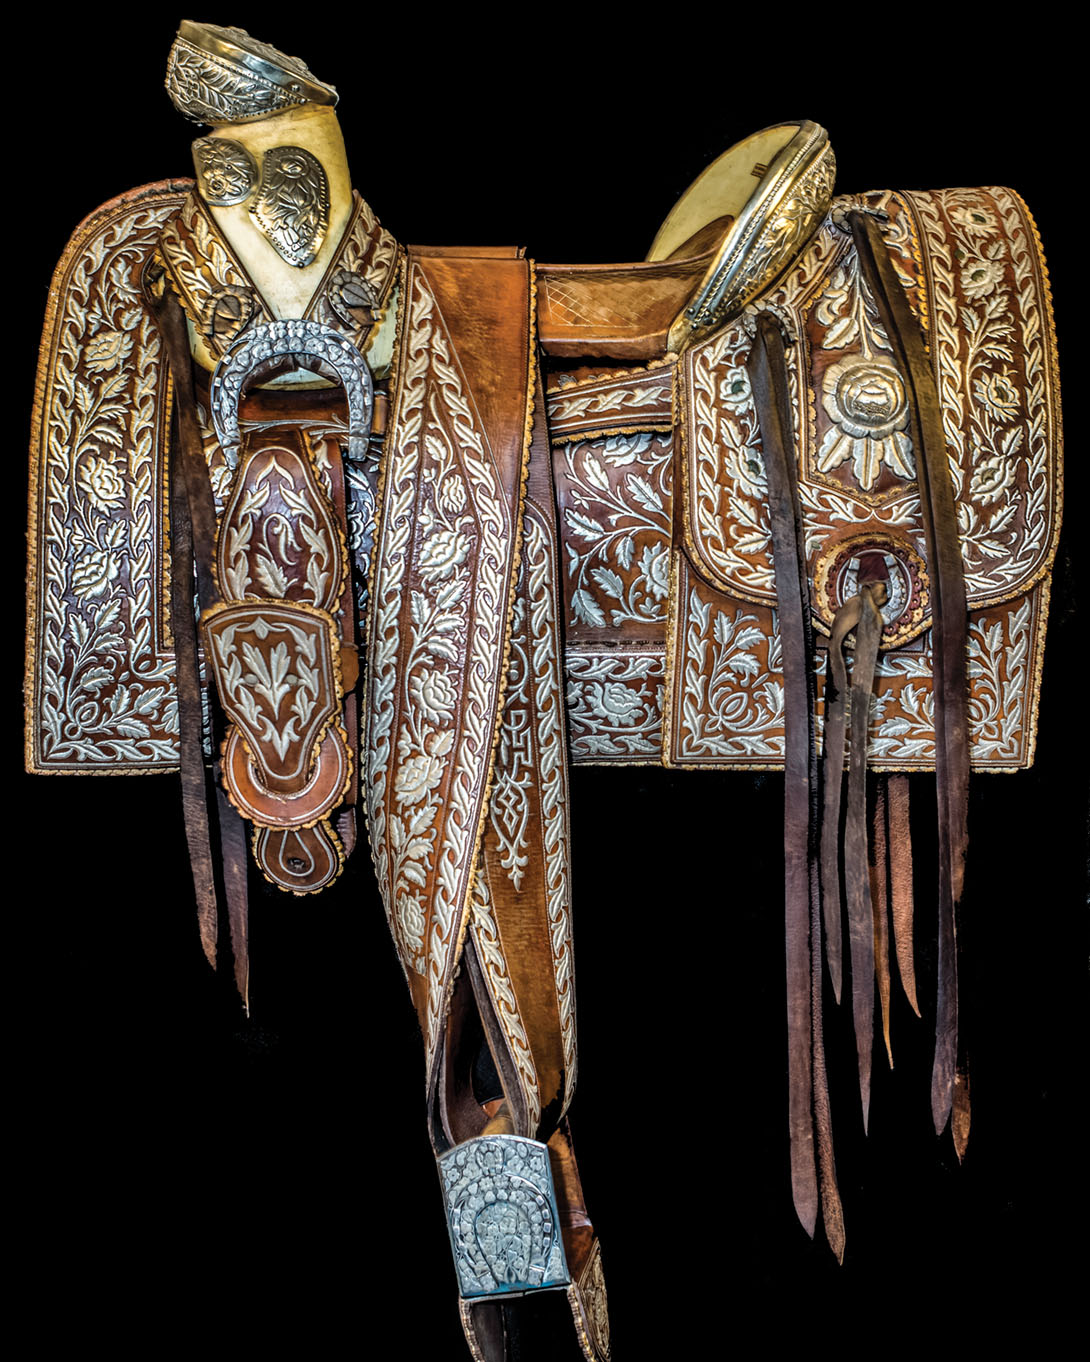 Photos of the historic saddles in the Santa Barbara Historical Museum